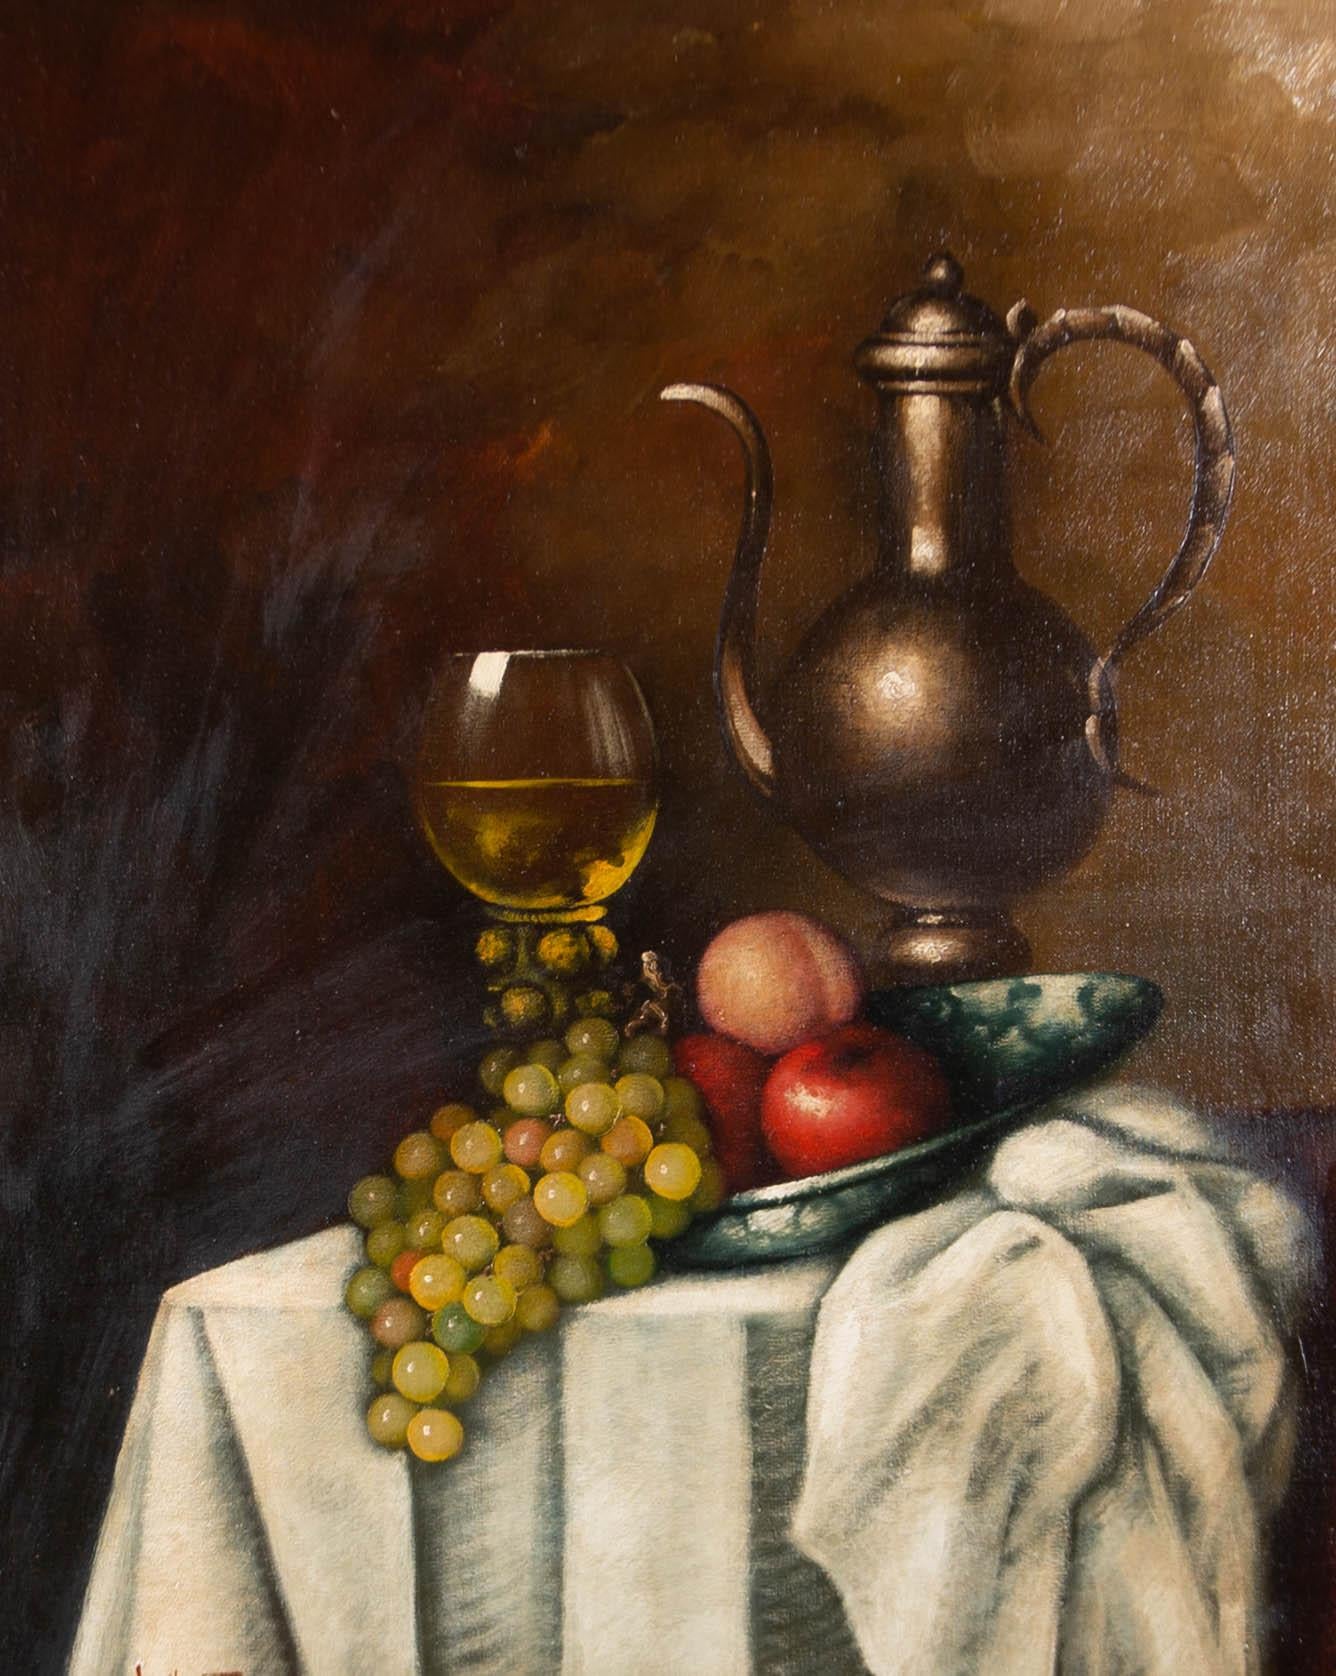 Peter Kloton (1927-1985) - Signed Mid 20th Century Oil, Drapery Still Life - Painting by Unknown